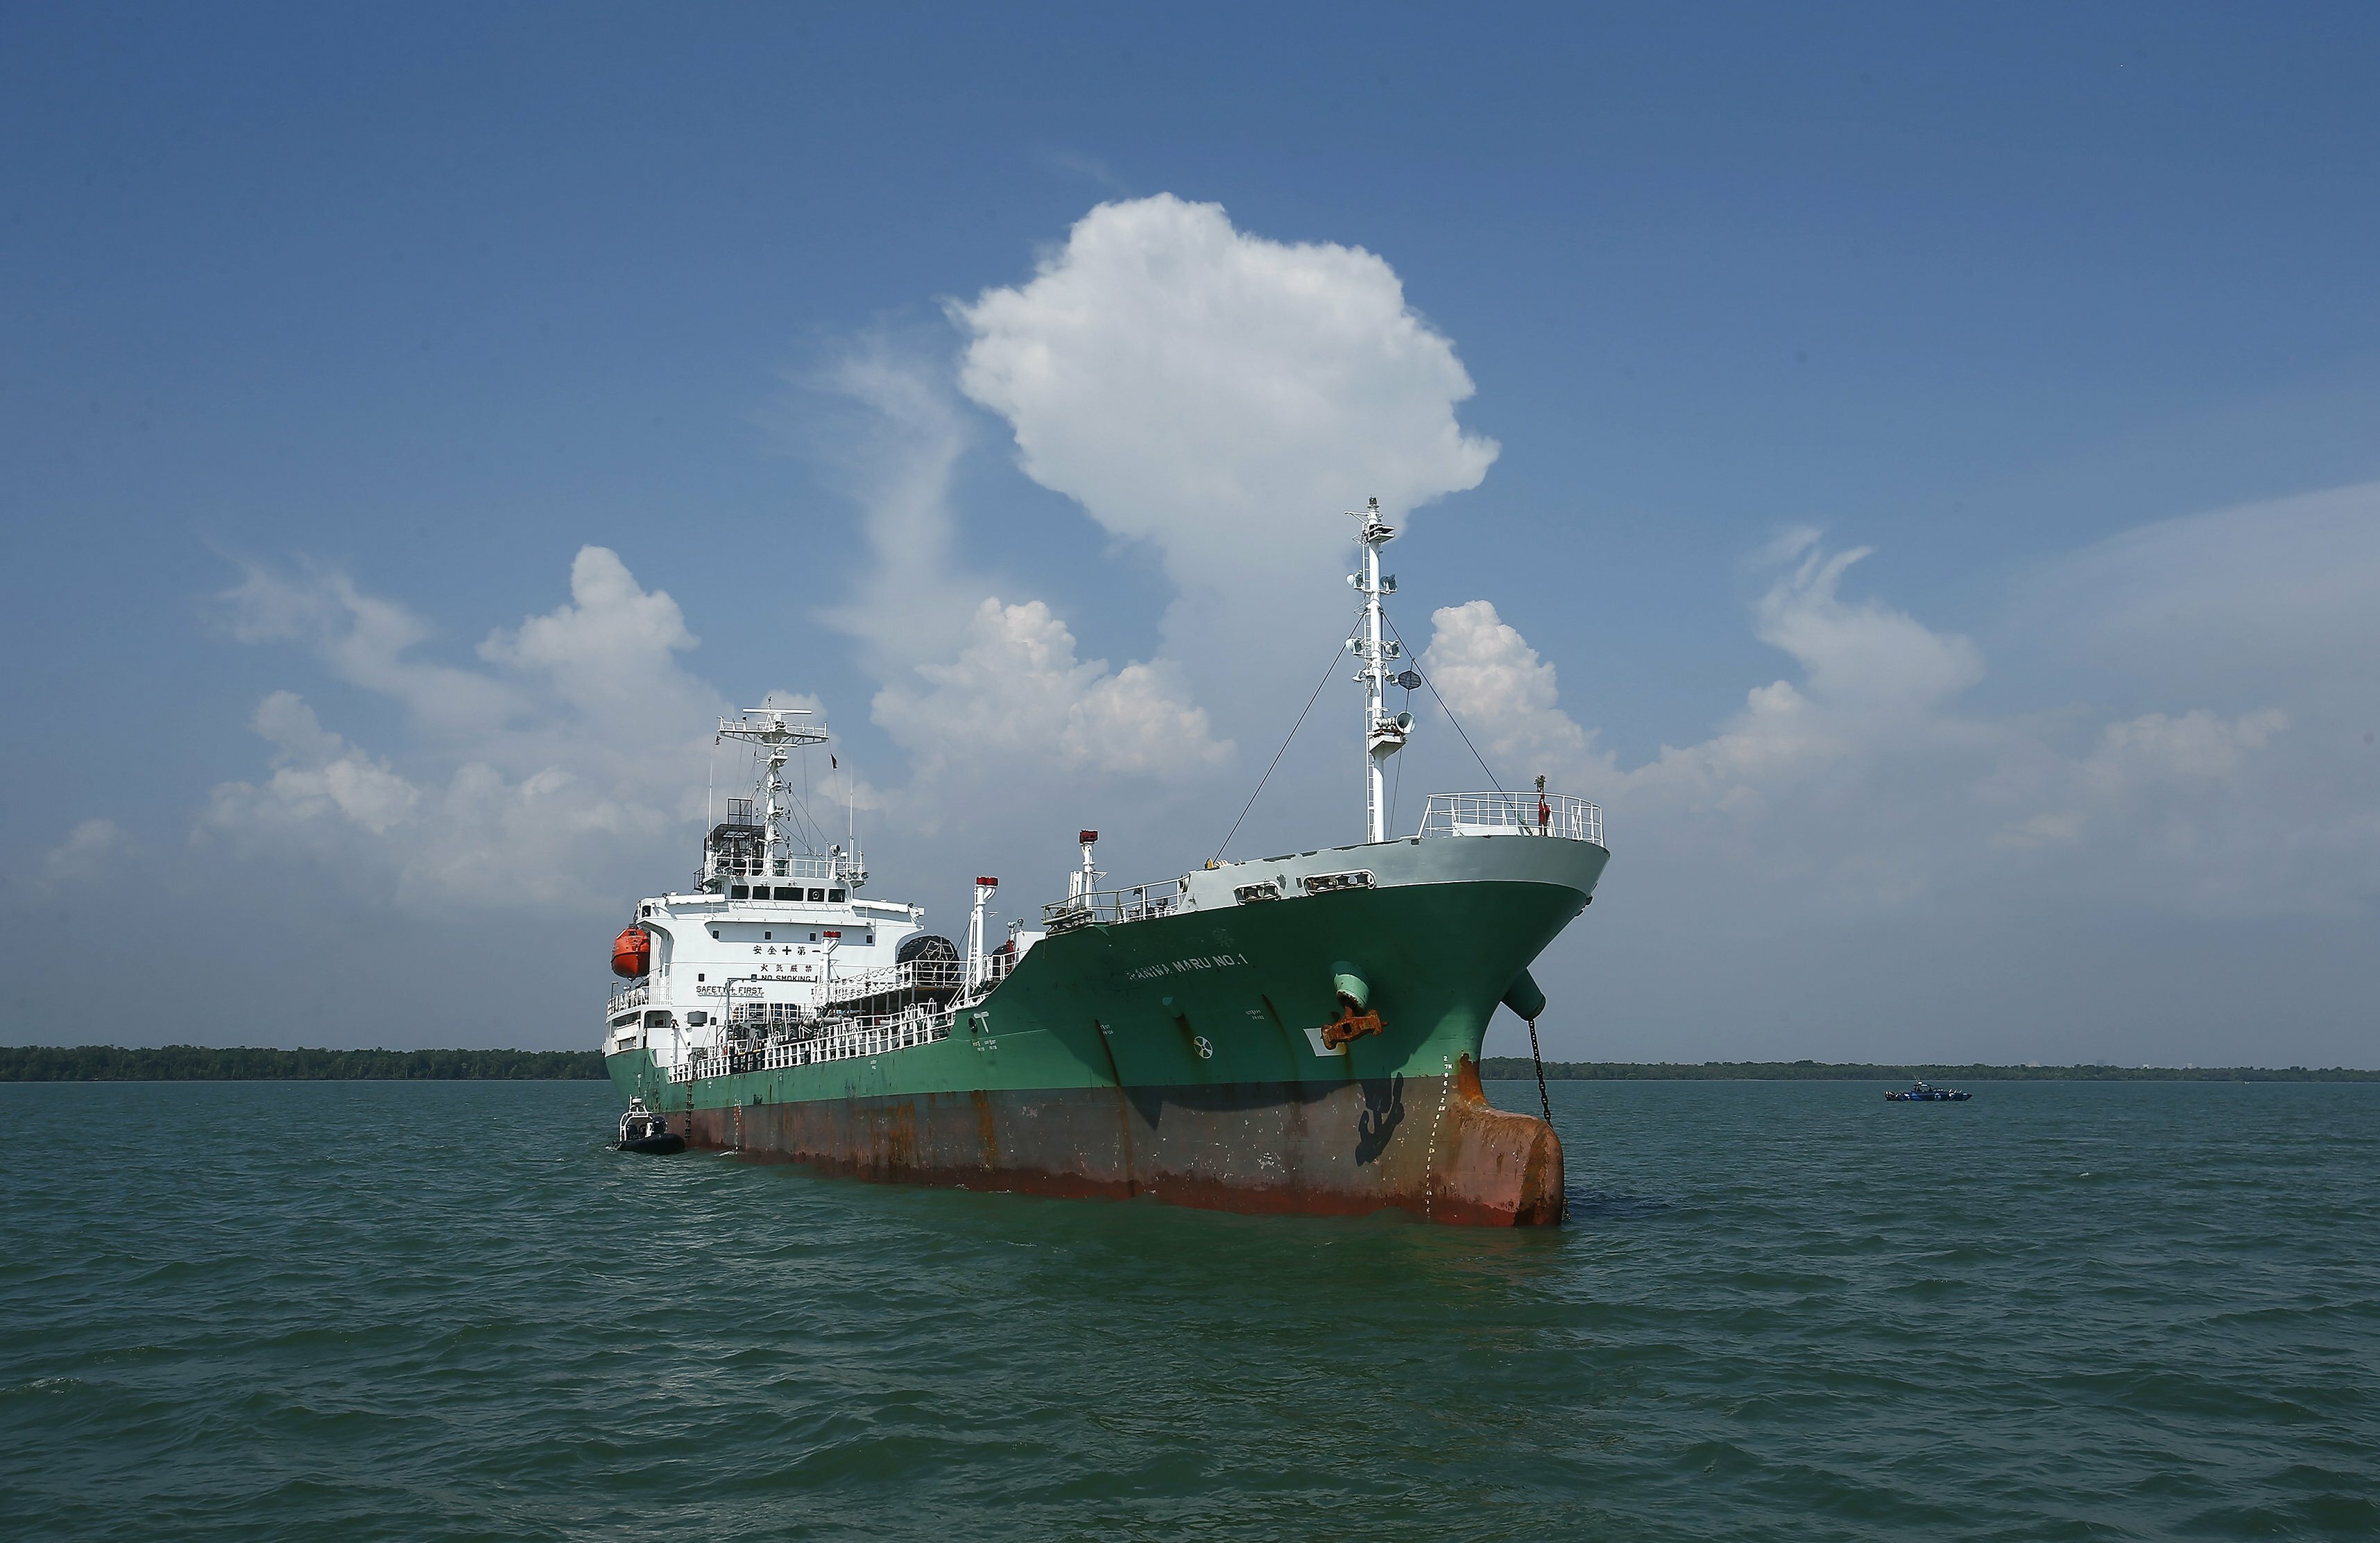 The Japanese oil tanker which was raided by armed pirates sails at Port Klang